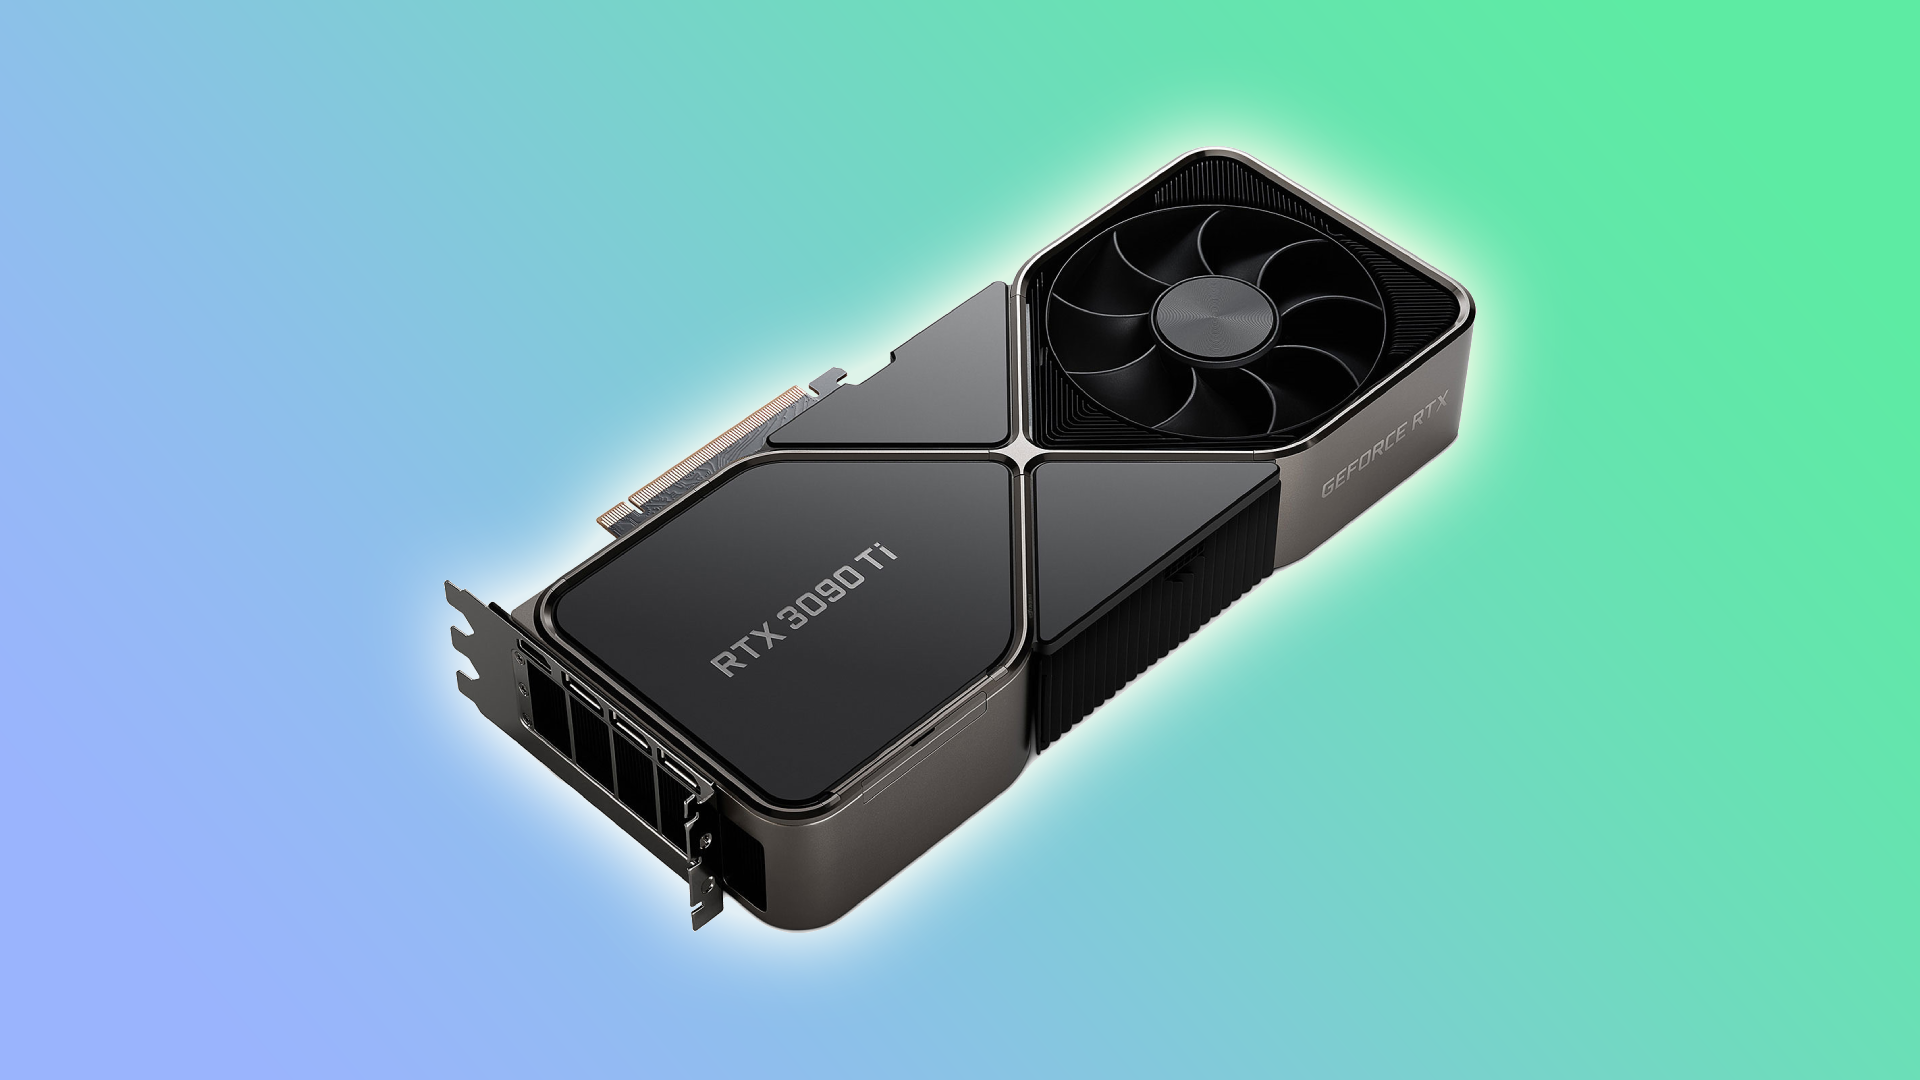 RTX Video Super Resolution scales 1080p video to 4K on RTX 30 and 40 series